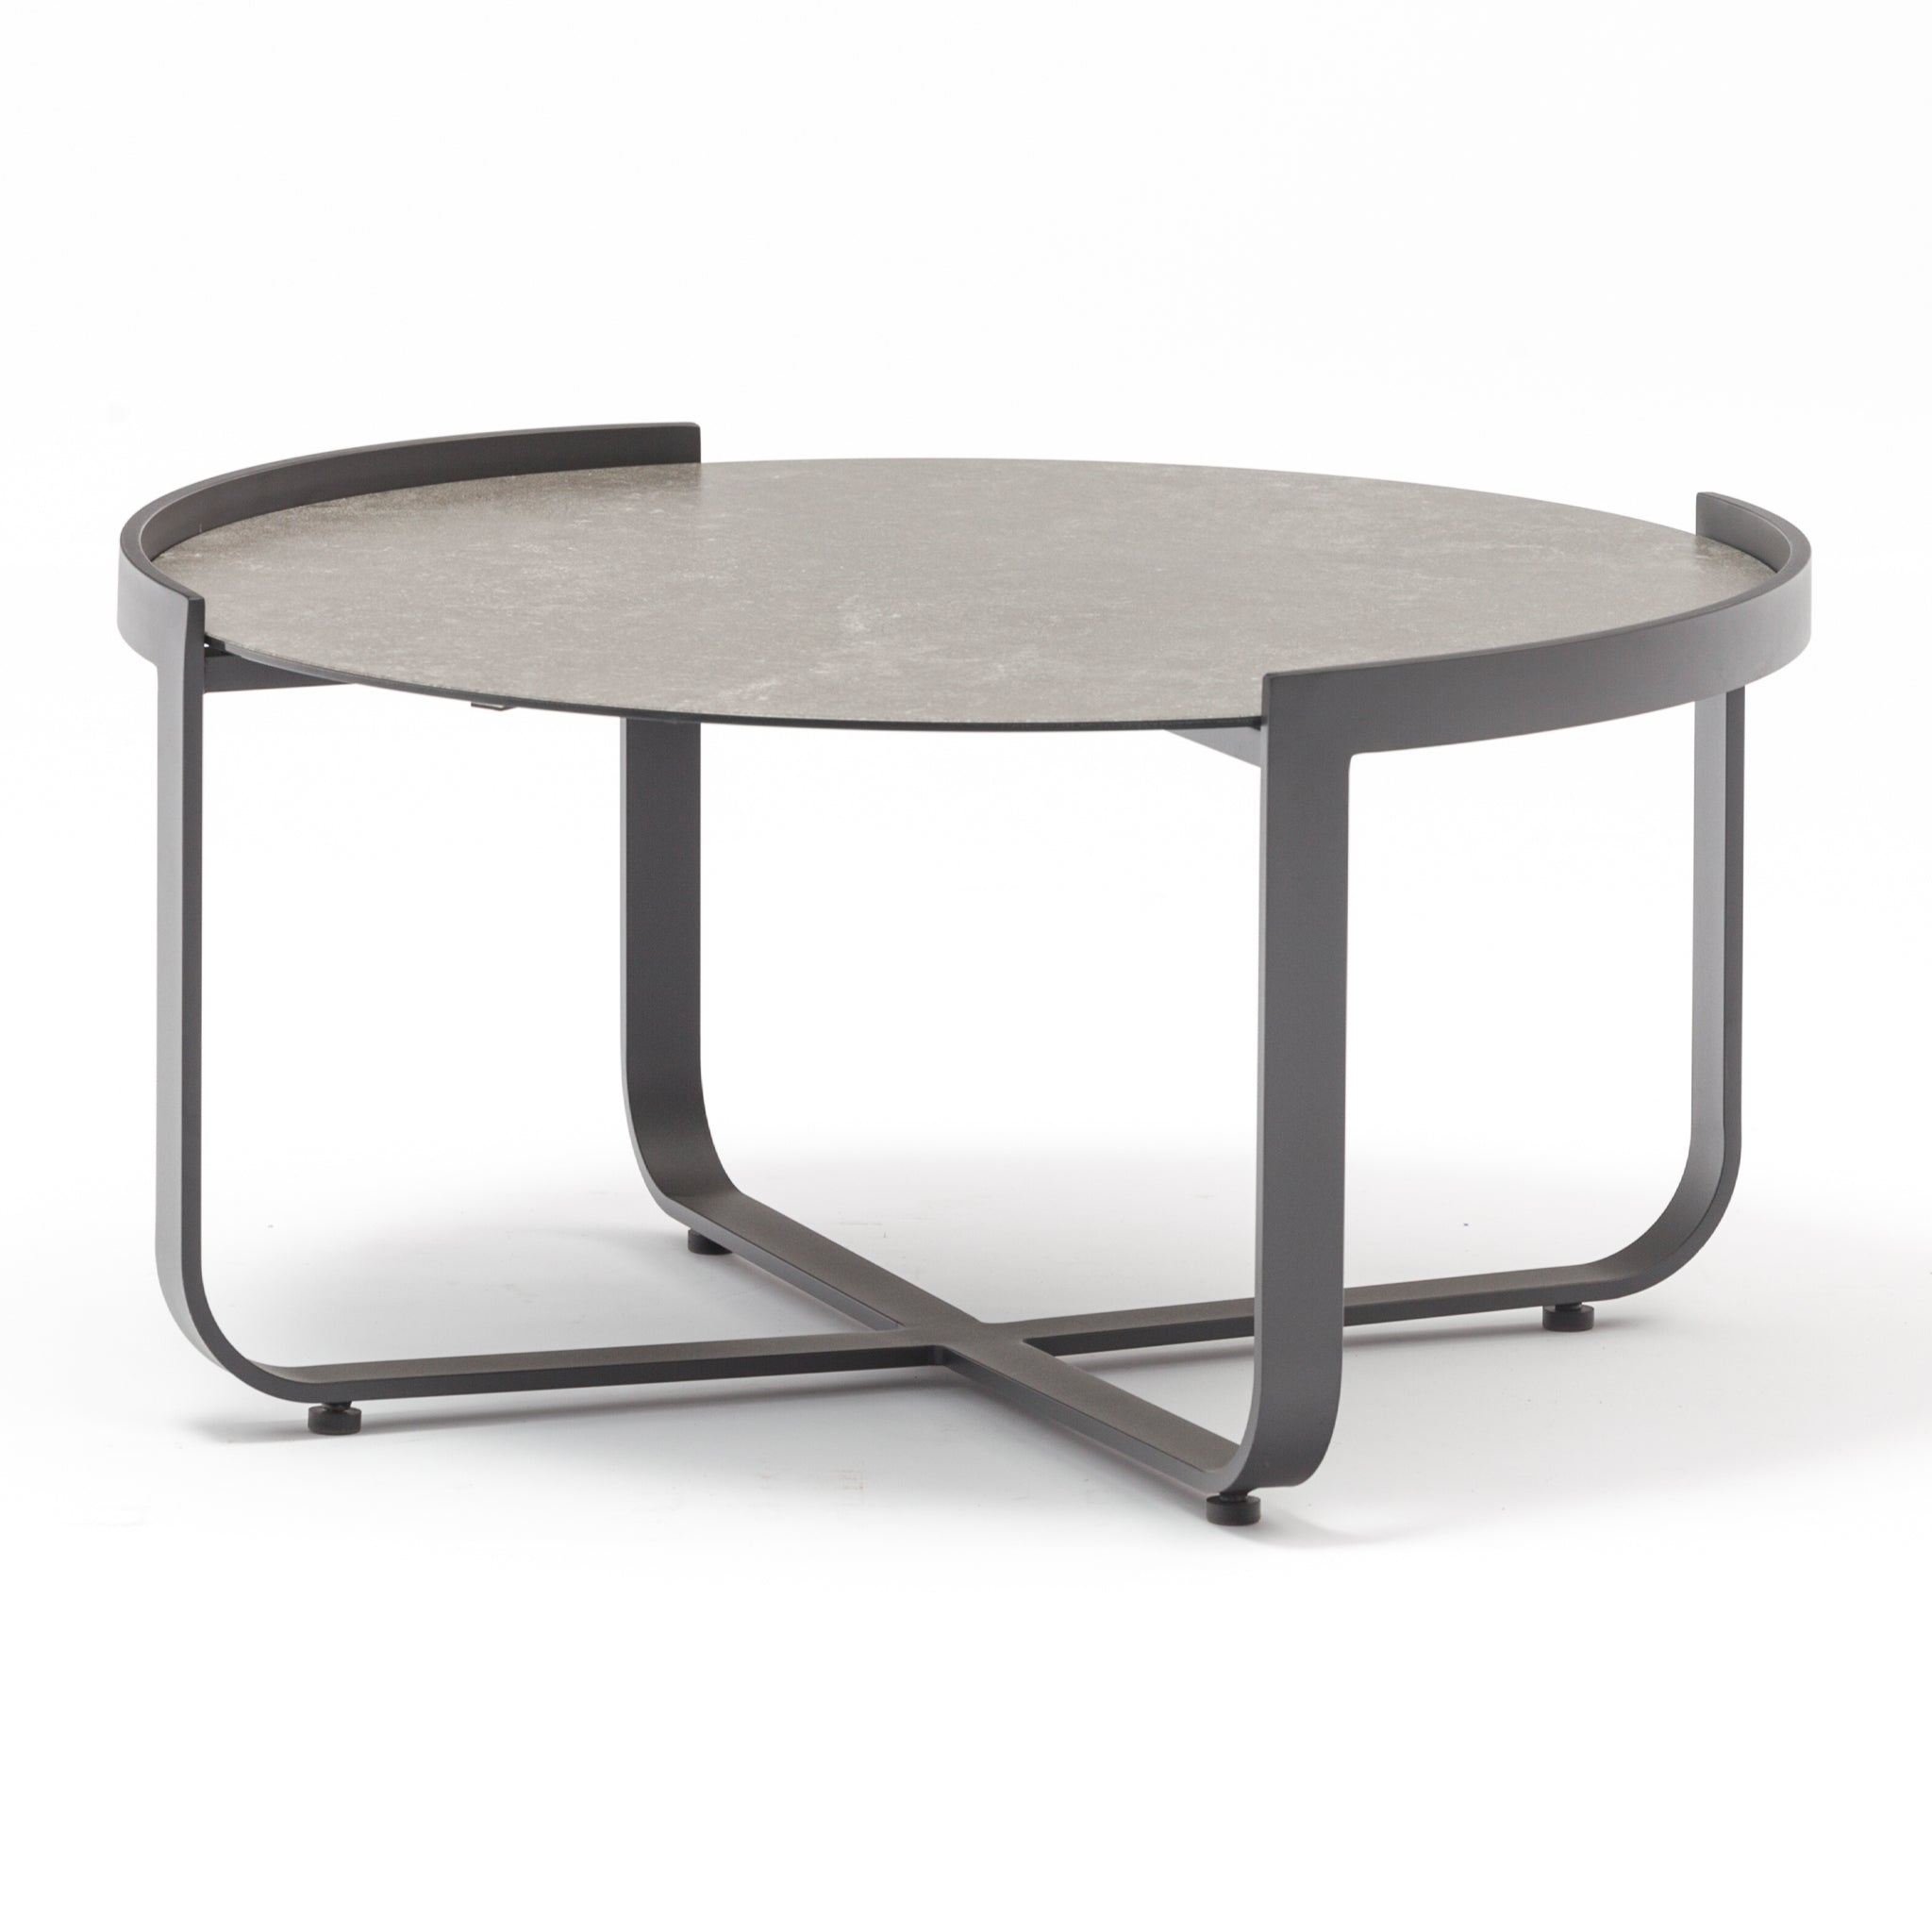 Bloom Coffee Table 80cm with Ceramic Top in Charcoal